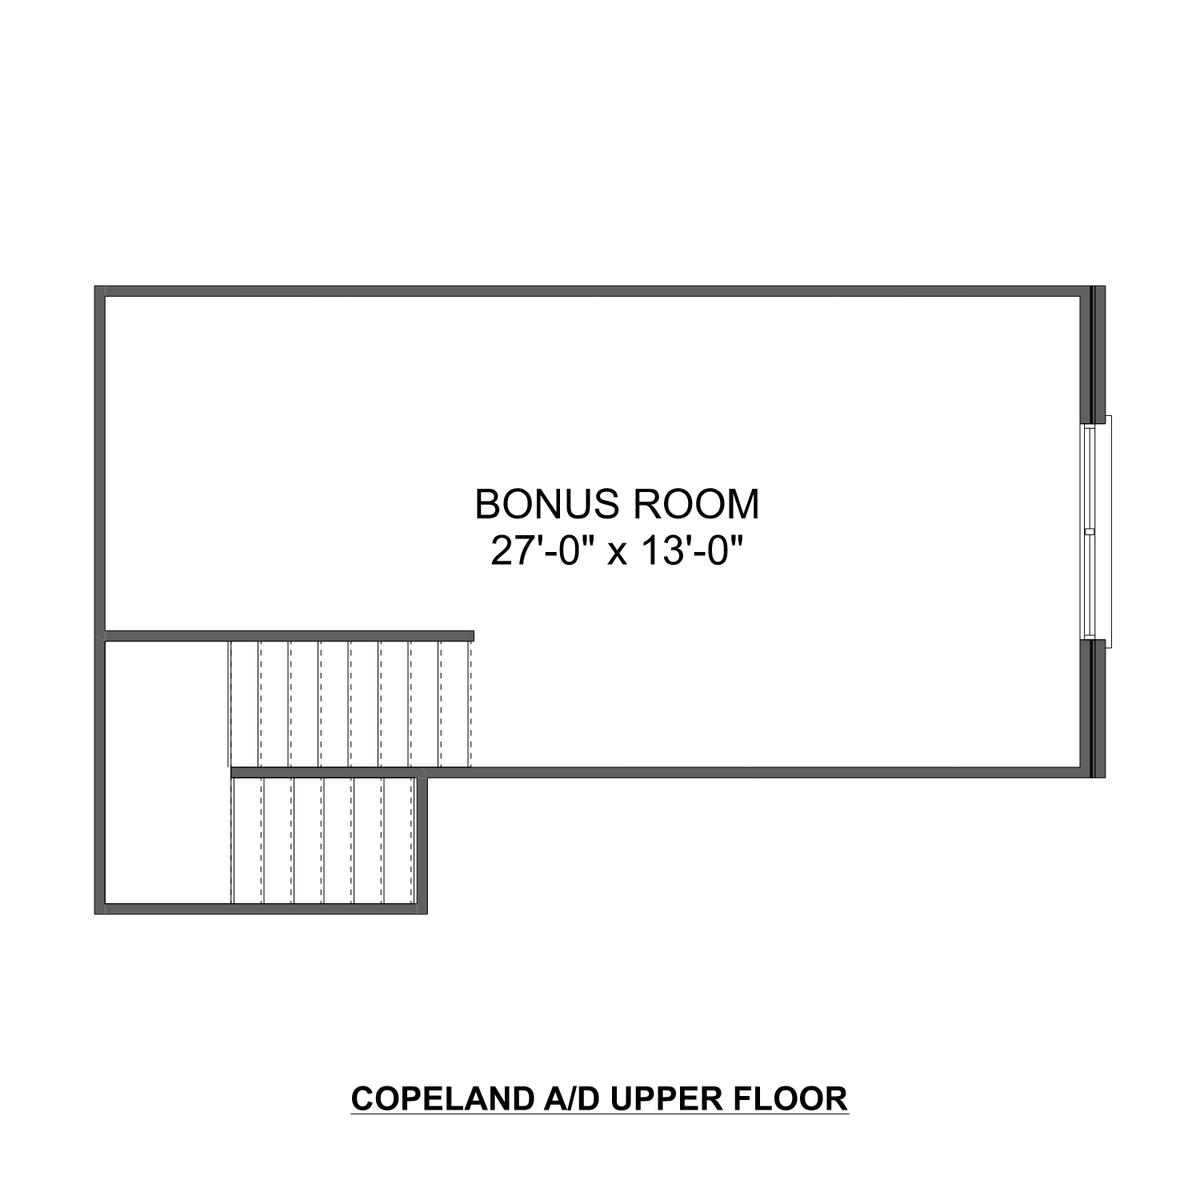 2 - The Copeland floor plan layout for 100 Atkinson Alley in Davidson Homes' Barnett's Crossing community.